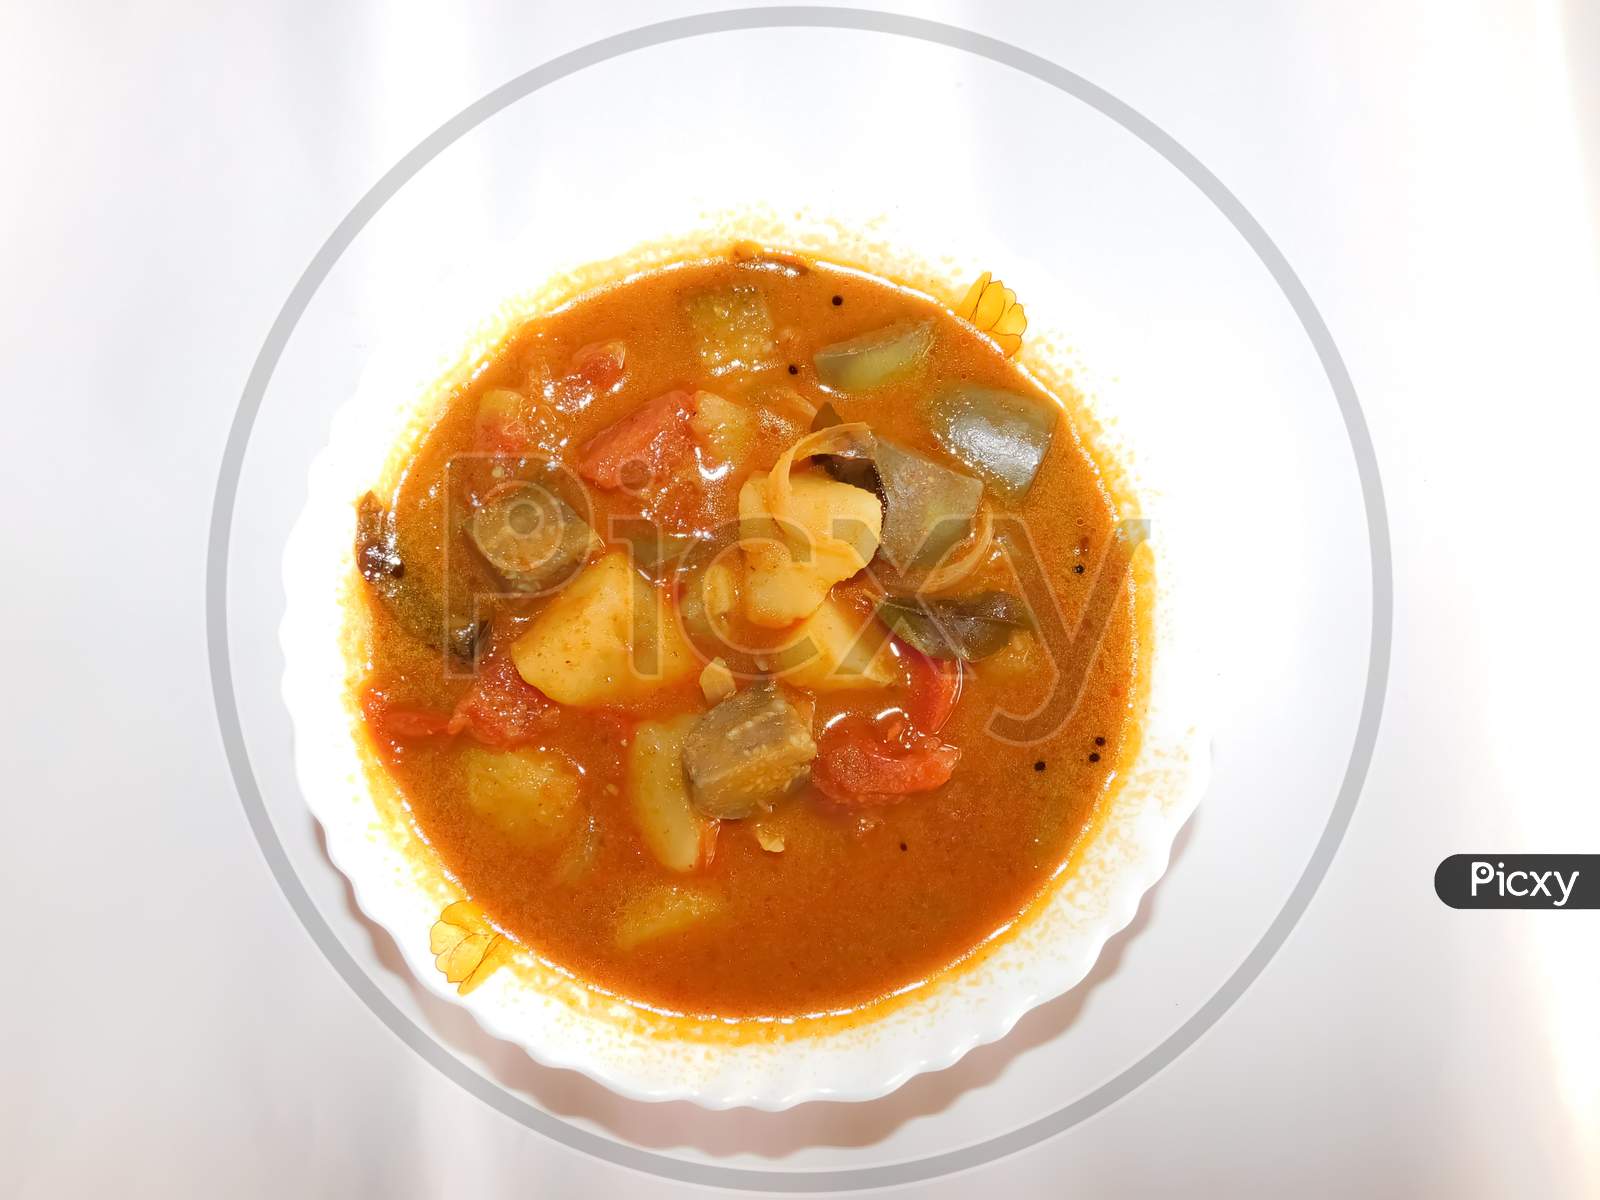 Delicious Dish(Sambar)In A Bowl Isolated On A White Surface